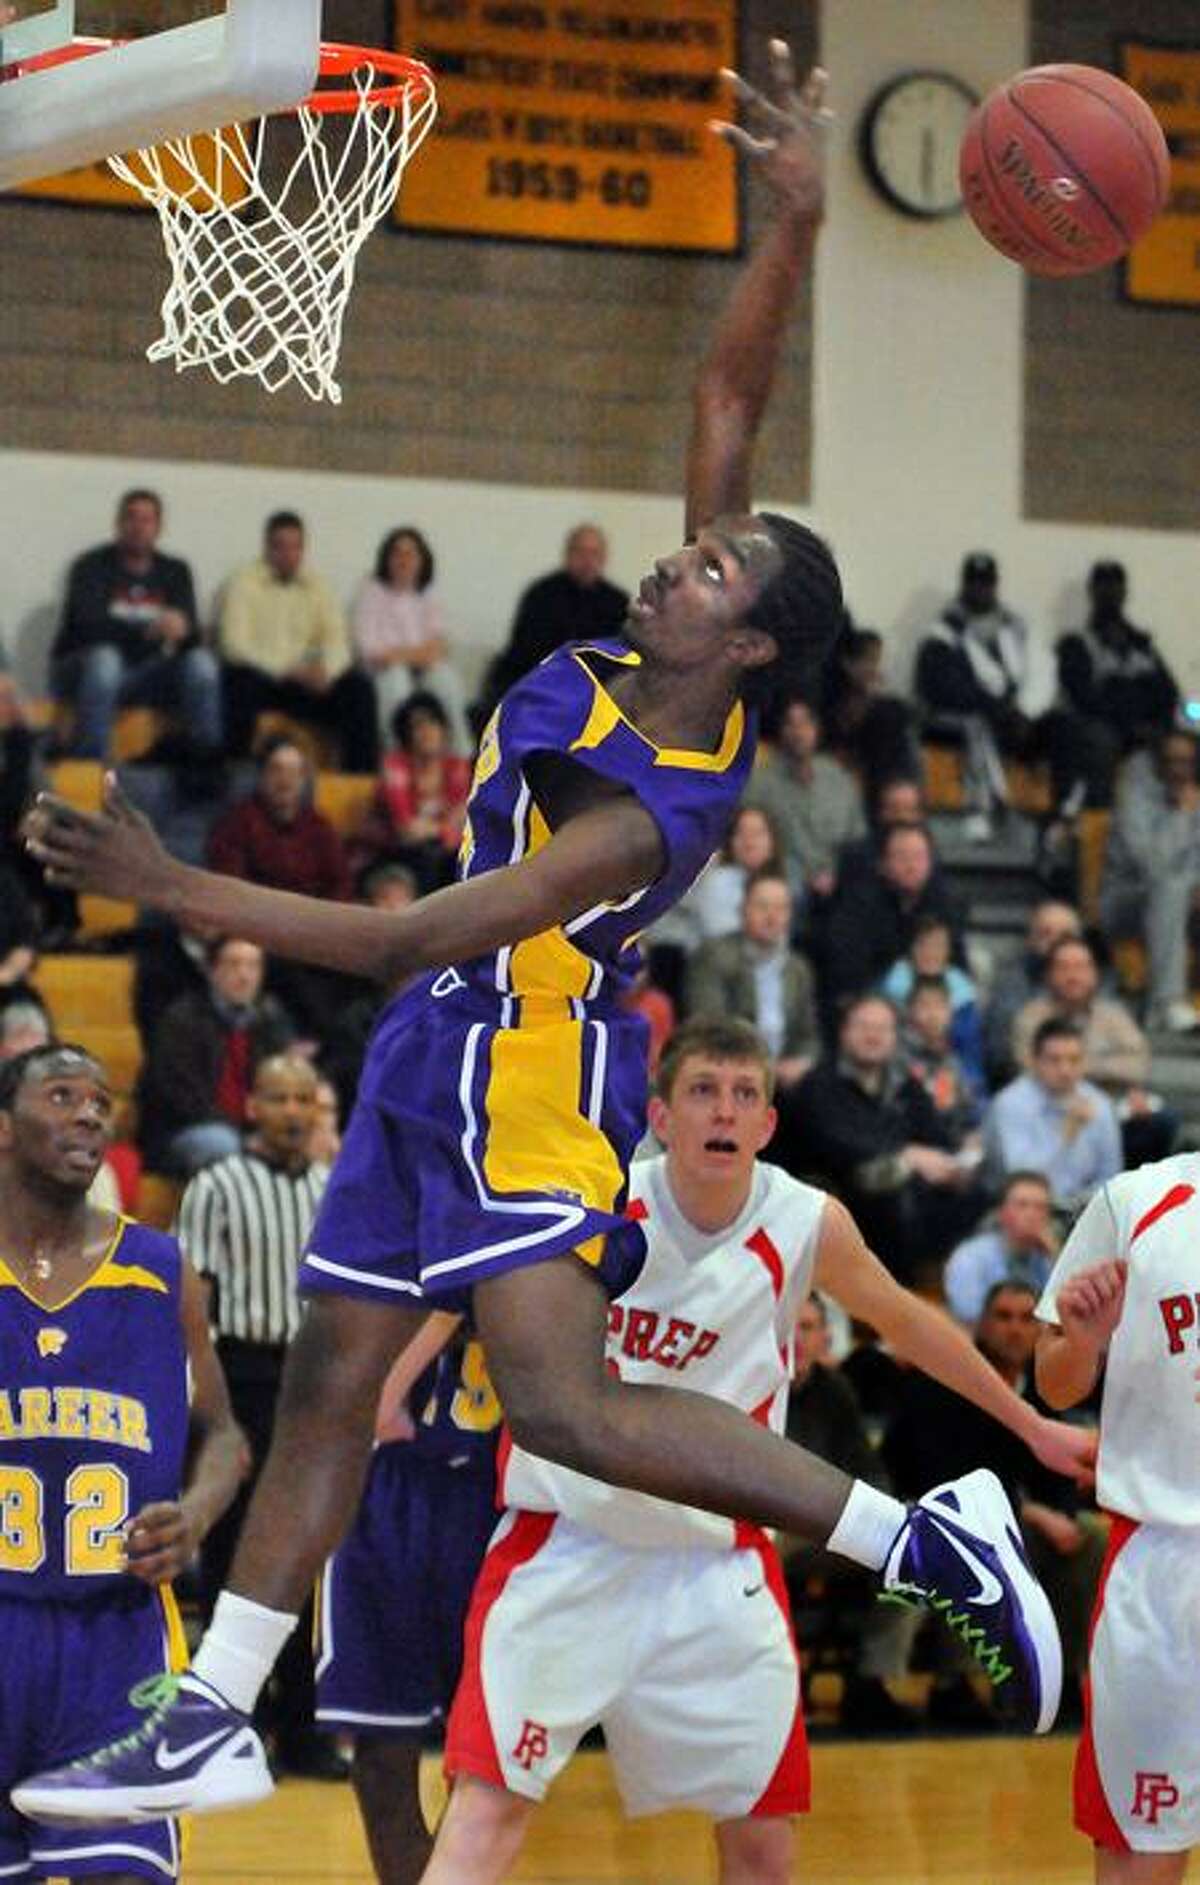 The SCC boys basketball semifinals at East Haven High School between Career of New Haven and Fairfield Prep. Career's Treyvon Moore up for two. Photo by Mara Lavitt/New Haven Register2/27/12